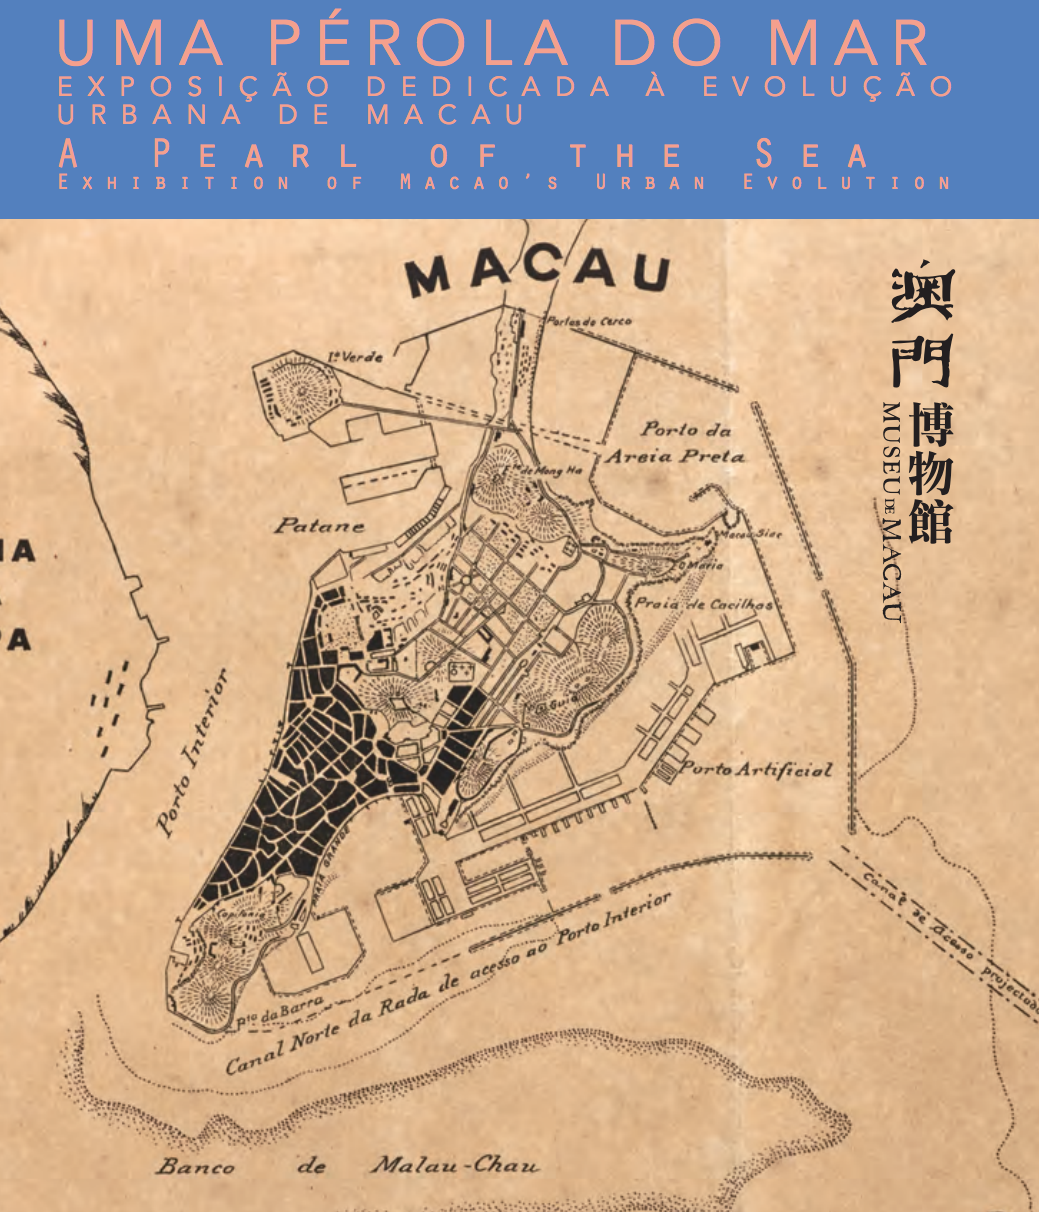 A Pearl of the Sea — Exhibition of Macaos Urban Evolution